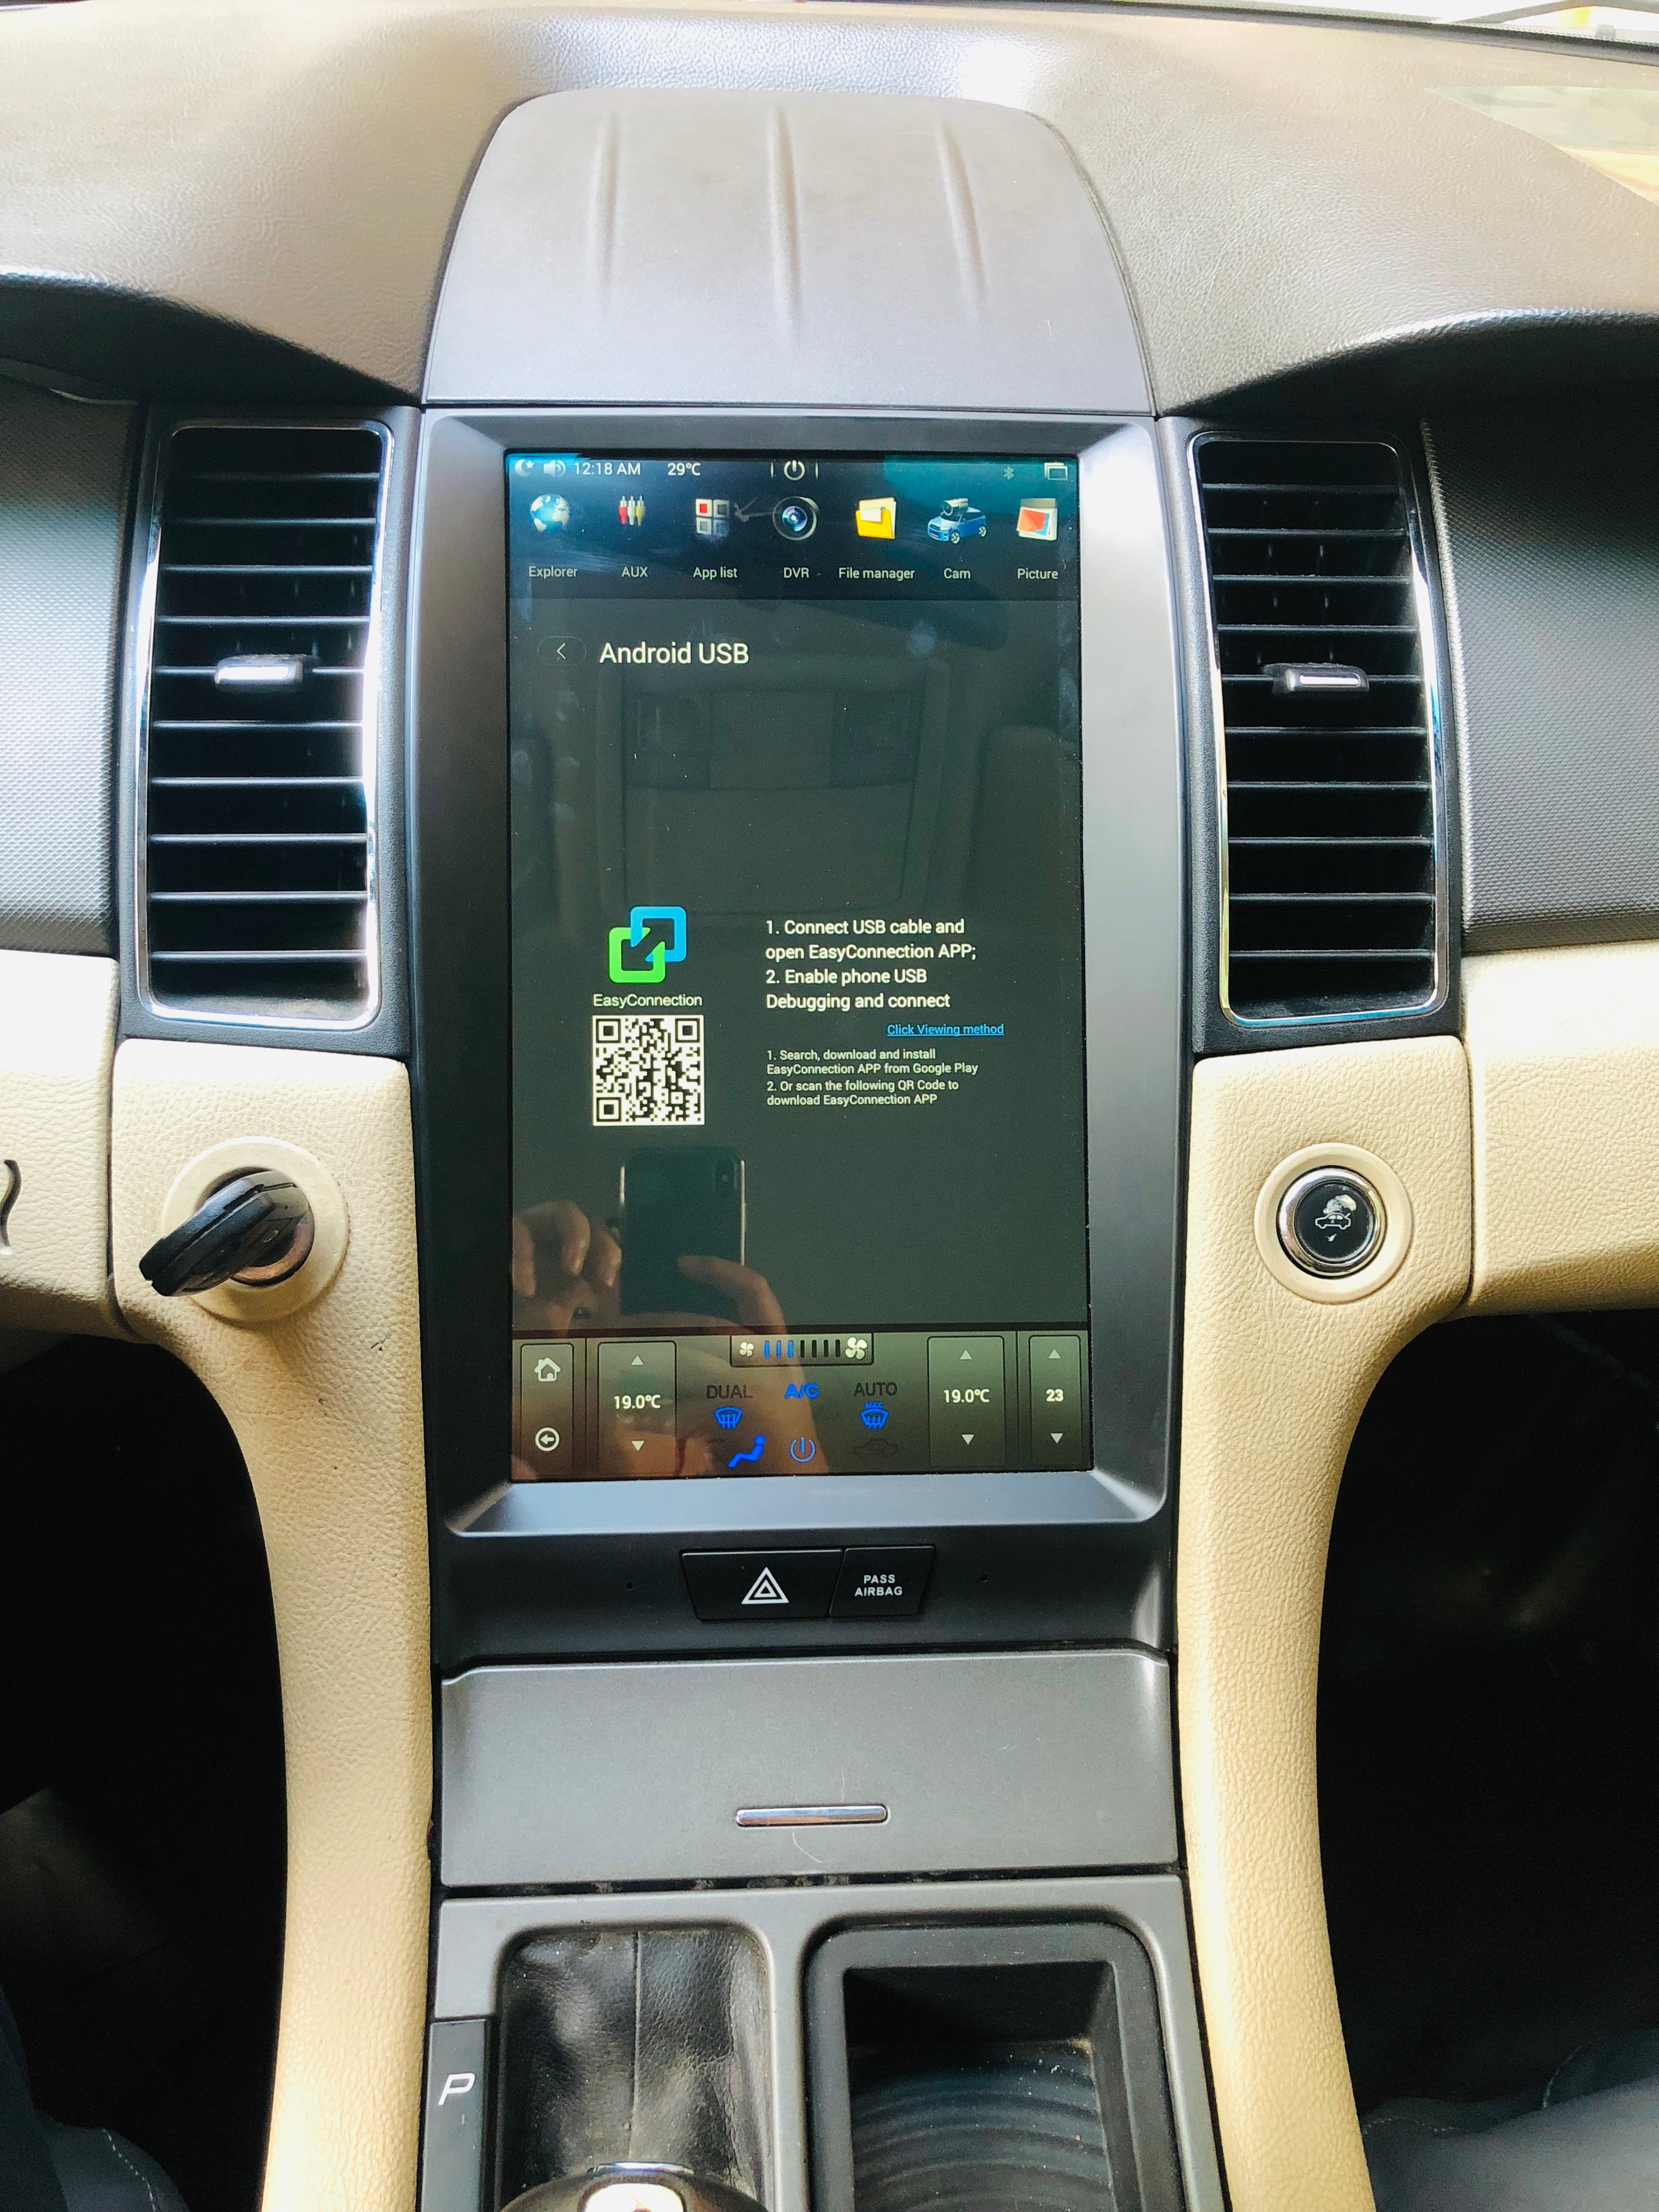 Ford Taurus 2013 - 2019 13.6" Vertical Screen Android Radio Tesla Style with 2K Resolution